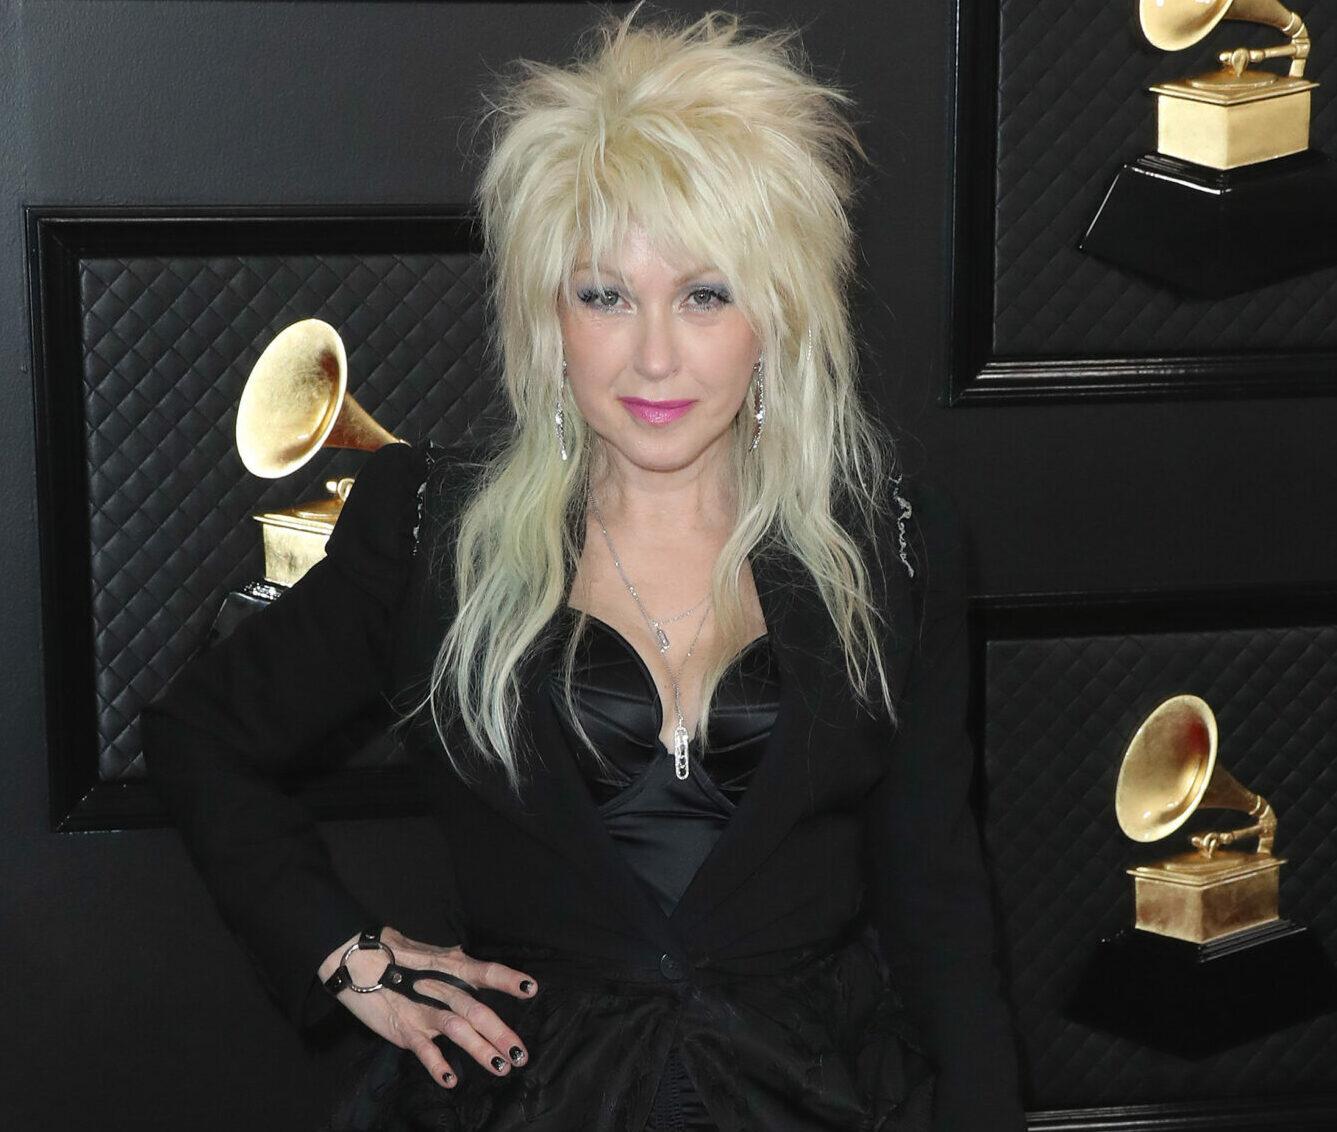 62nd Annual GRAMMY Awards held at Staples Center on January 26, 2020 in Los Angeles, California, United States. 26 Jan 2020 Pictured: Cyndi Lauper.